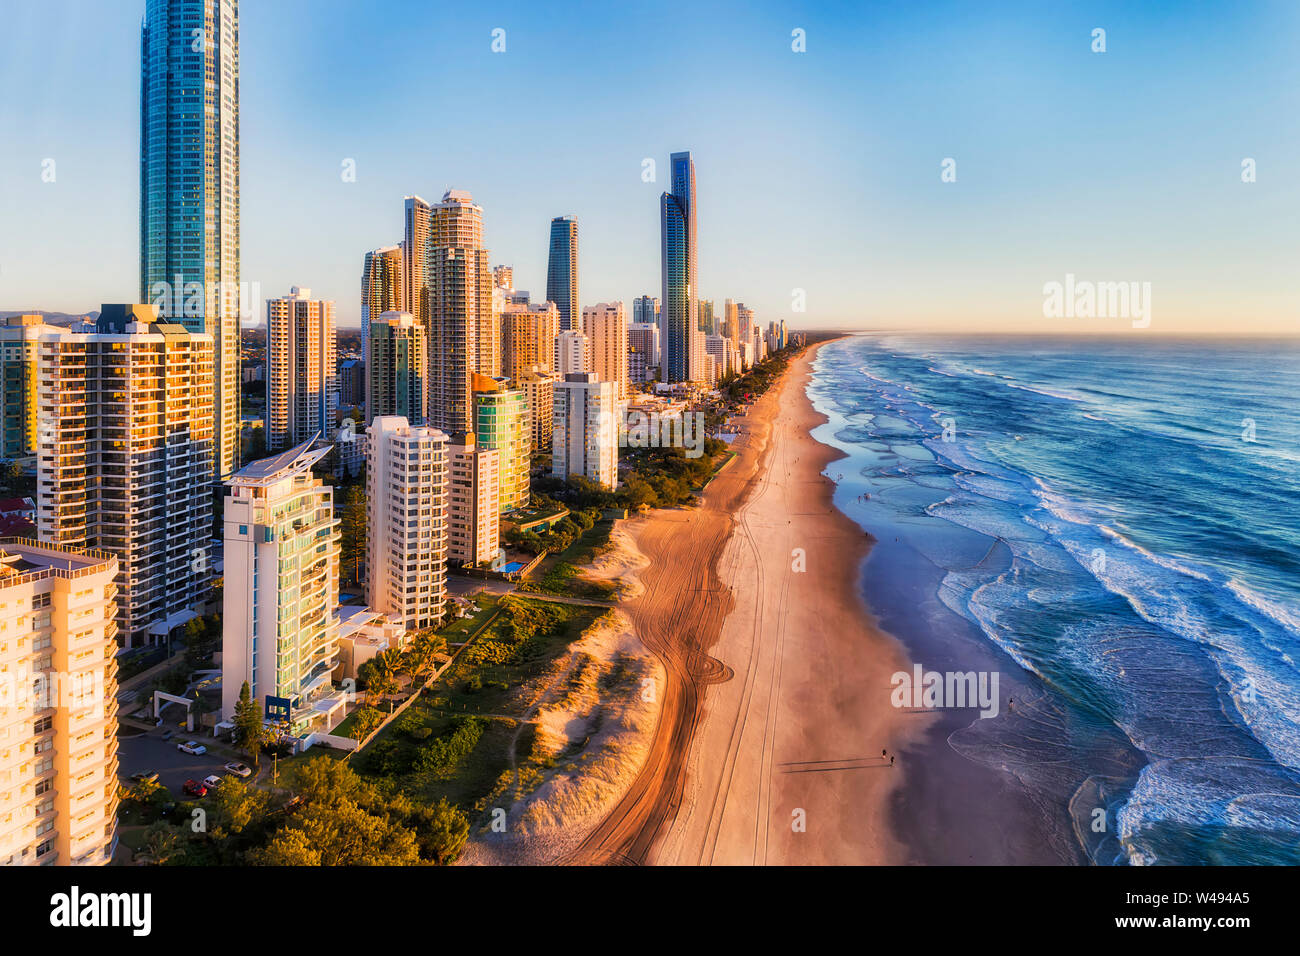 Waterfront of Surfers Paradise city high-rise towers growing from wide long sandy beach against open wild waves of Pacific ocean on Australian Gold Co Stock Photo